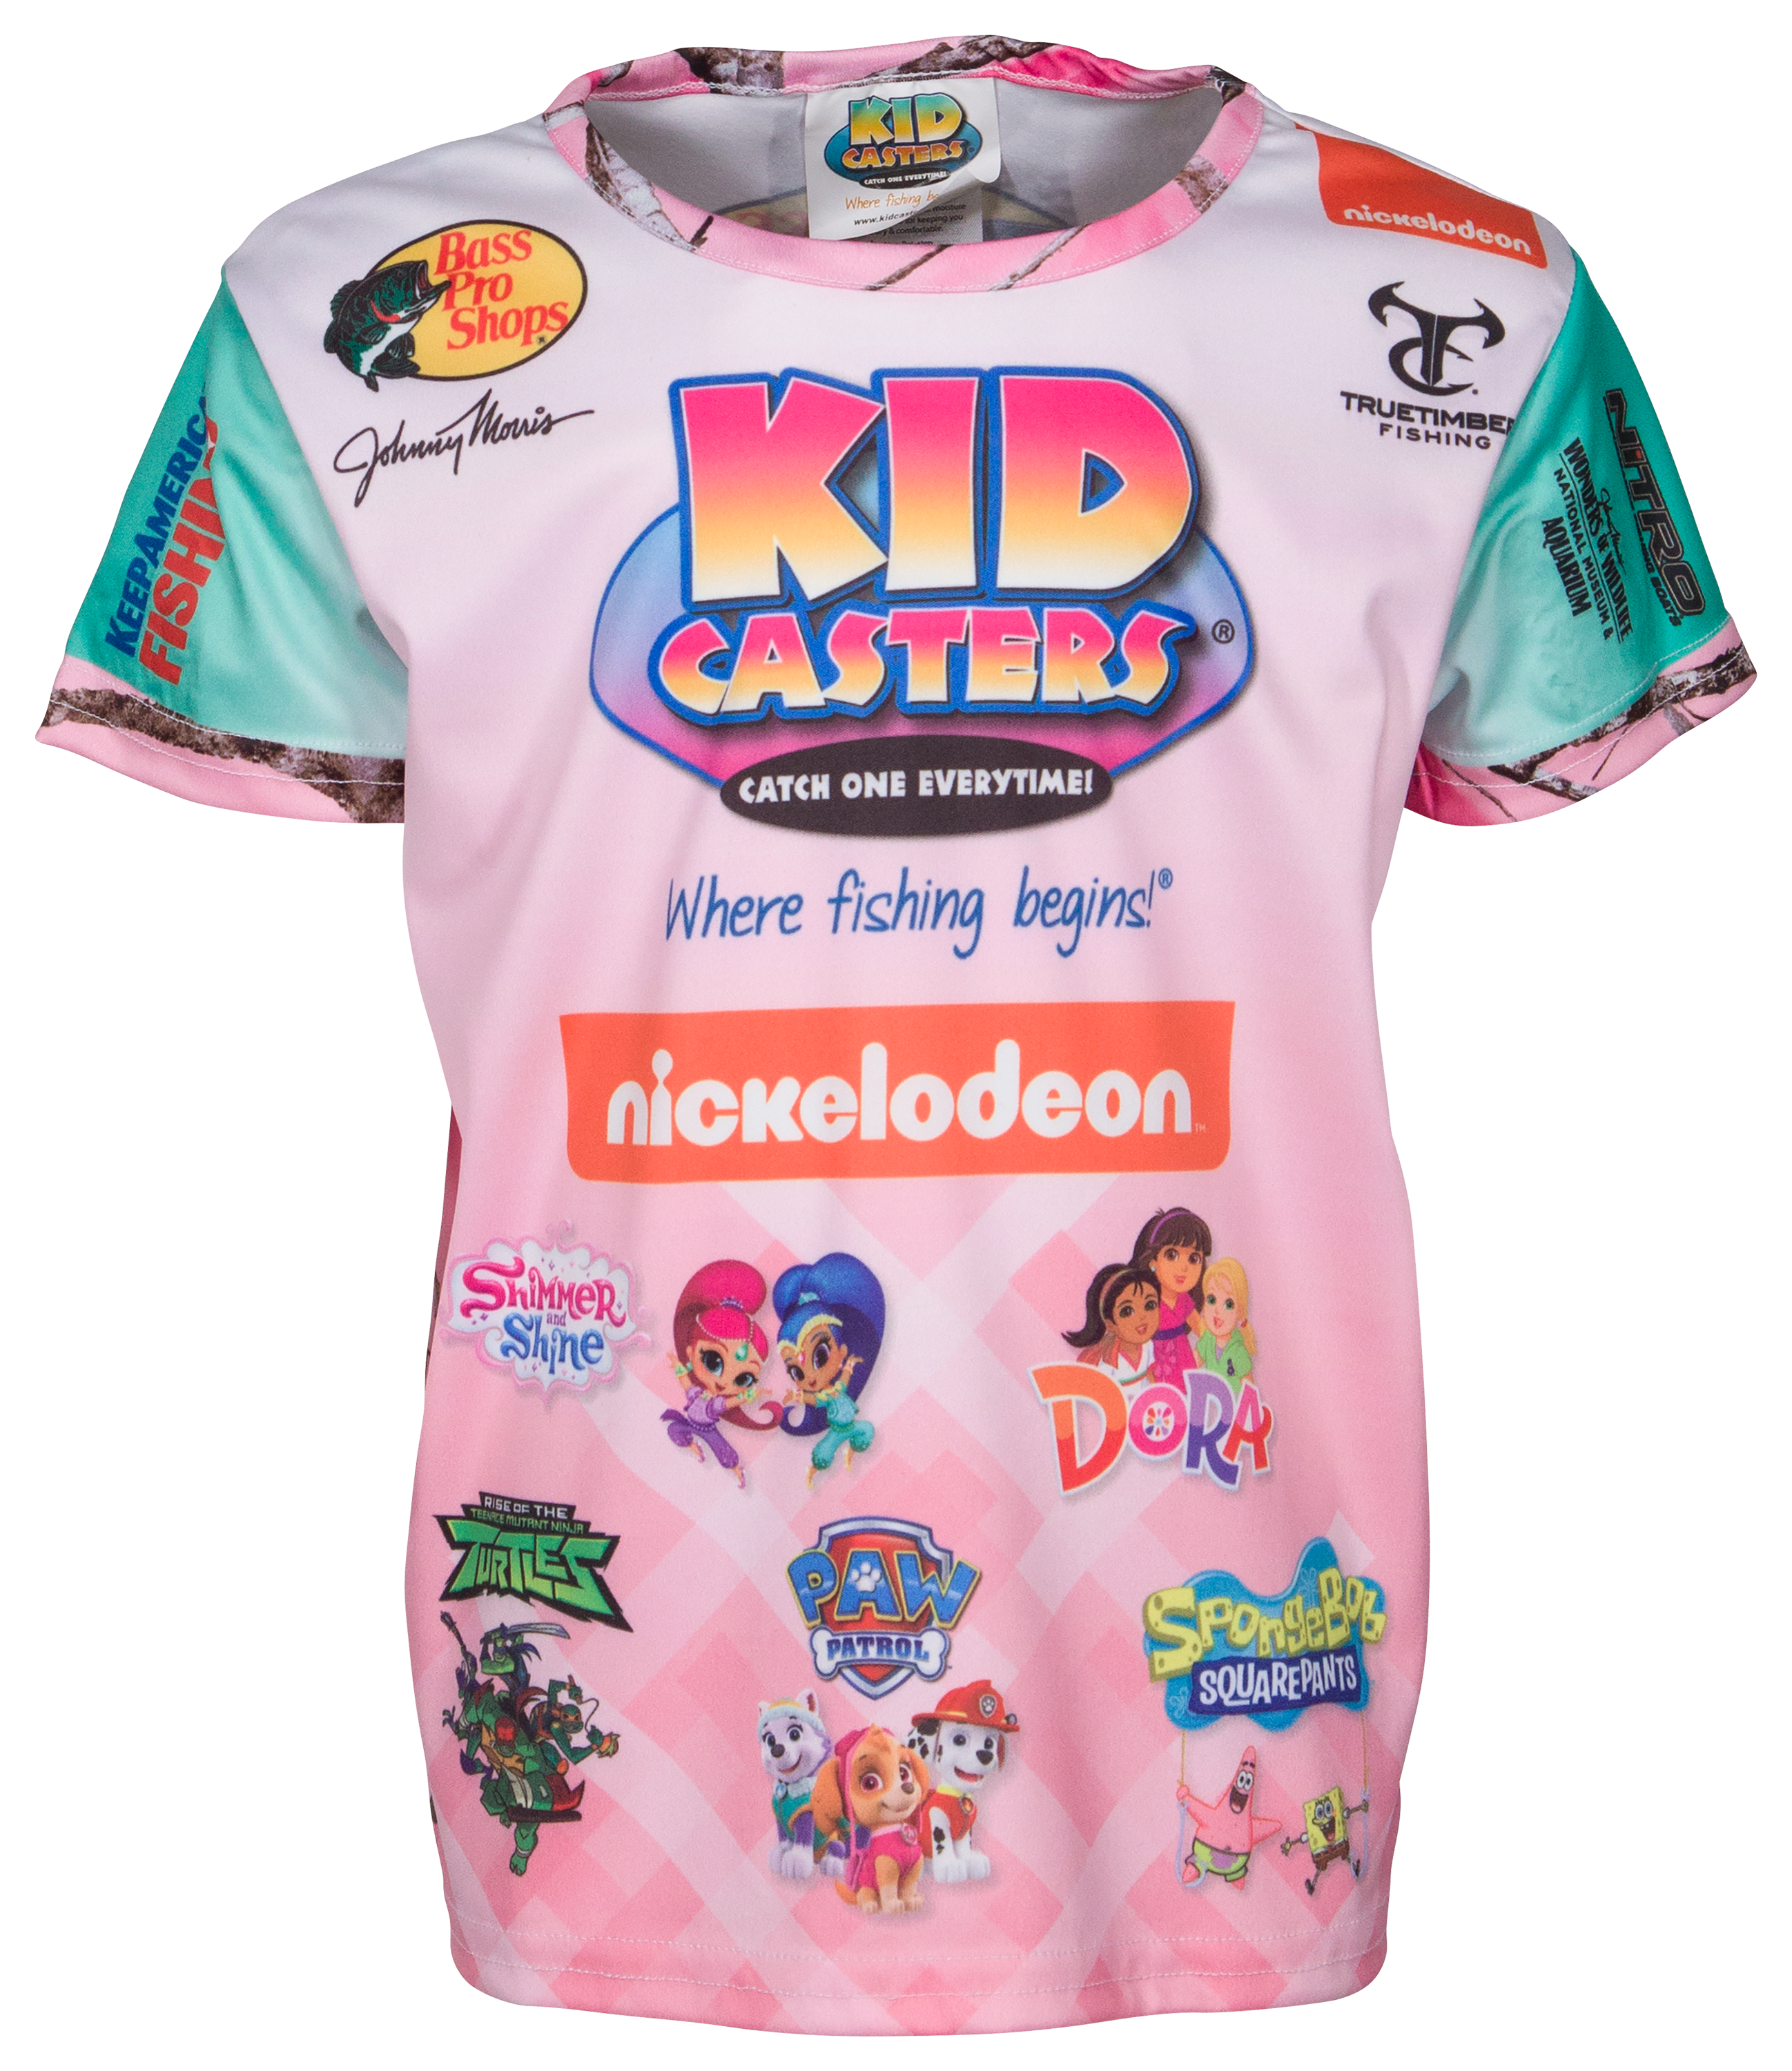 Bass Pro Shops Kid Casters Fishing Short-Sleeve Shirt for Toddlers - Pink - 3T